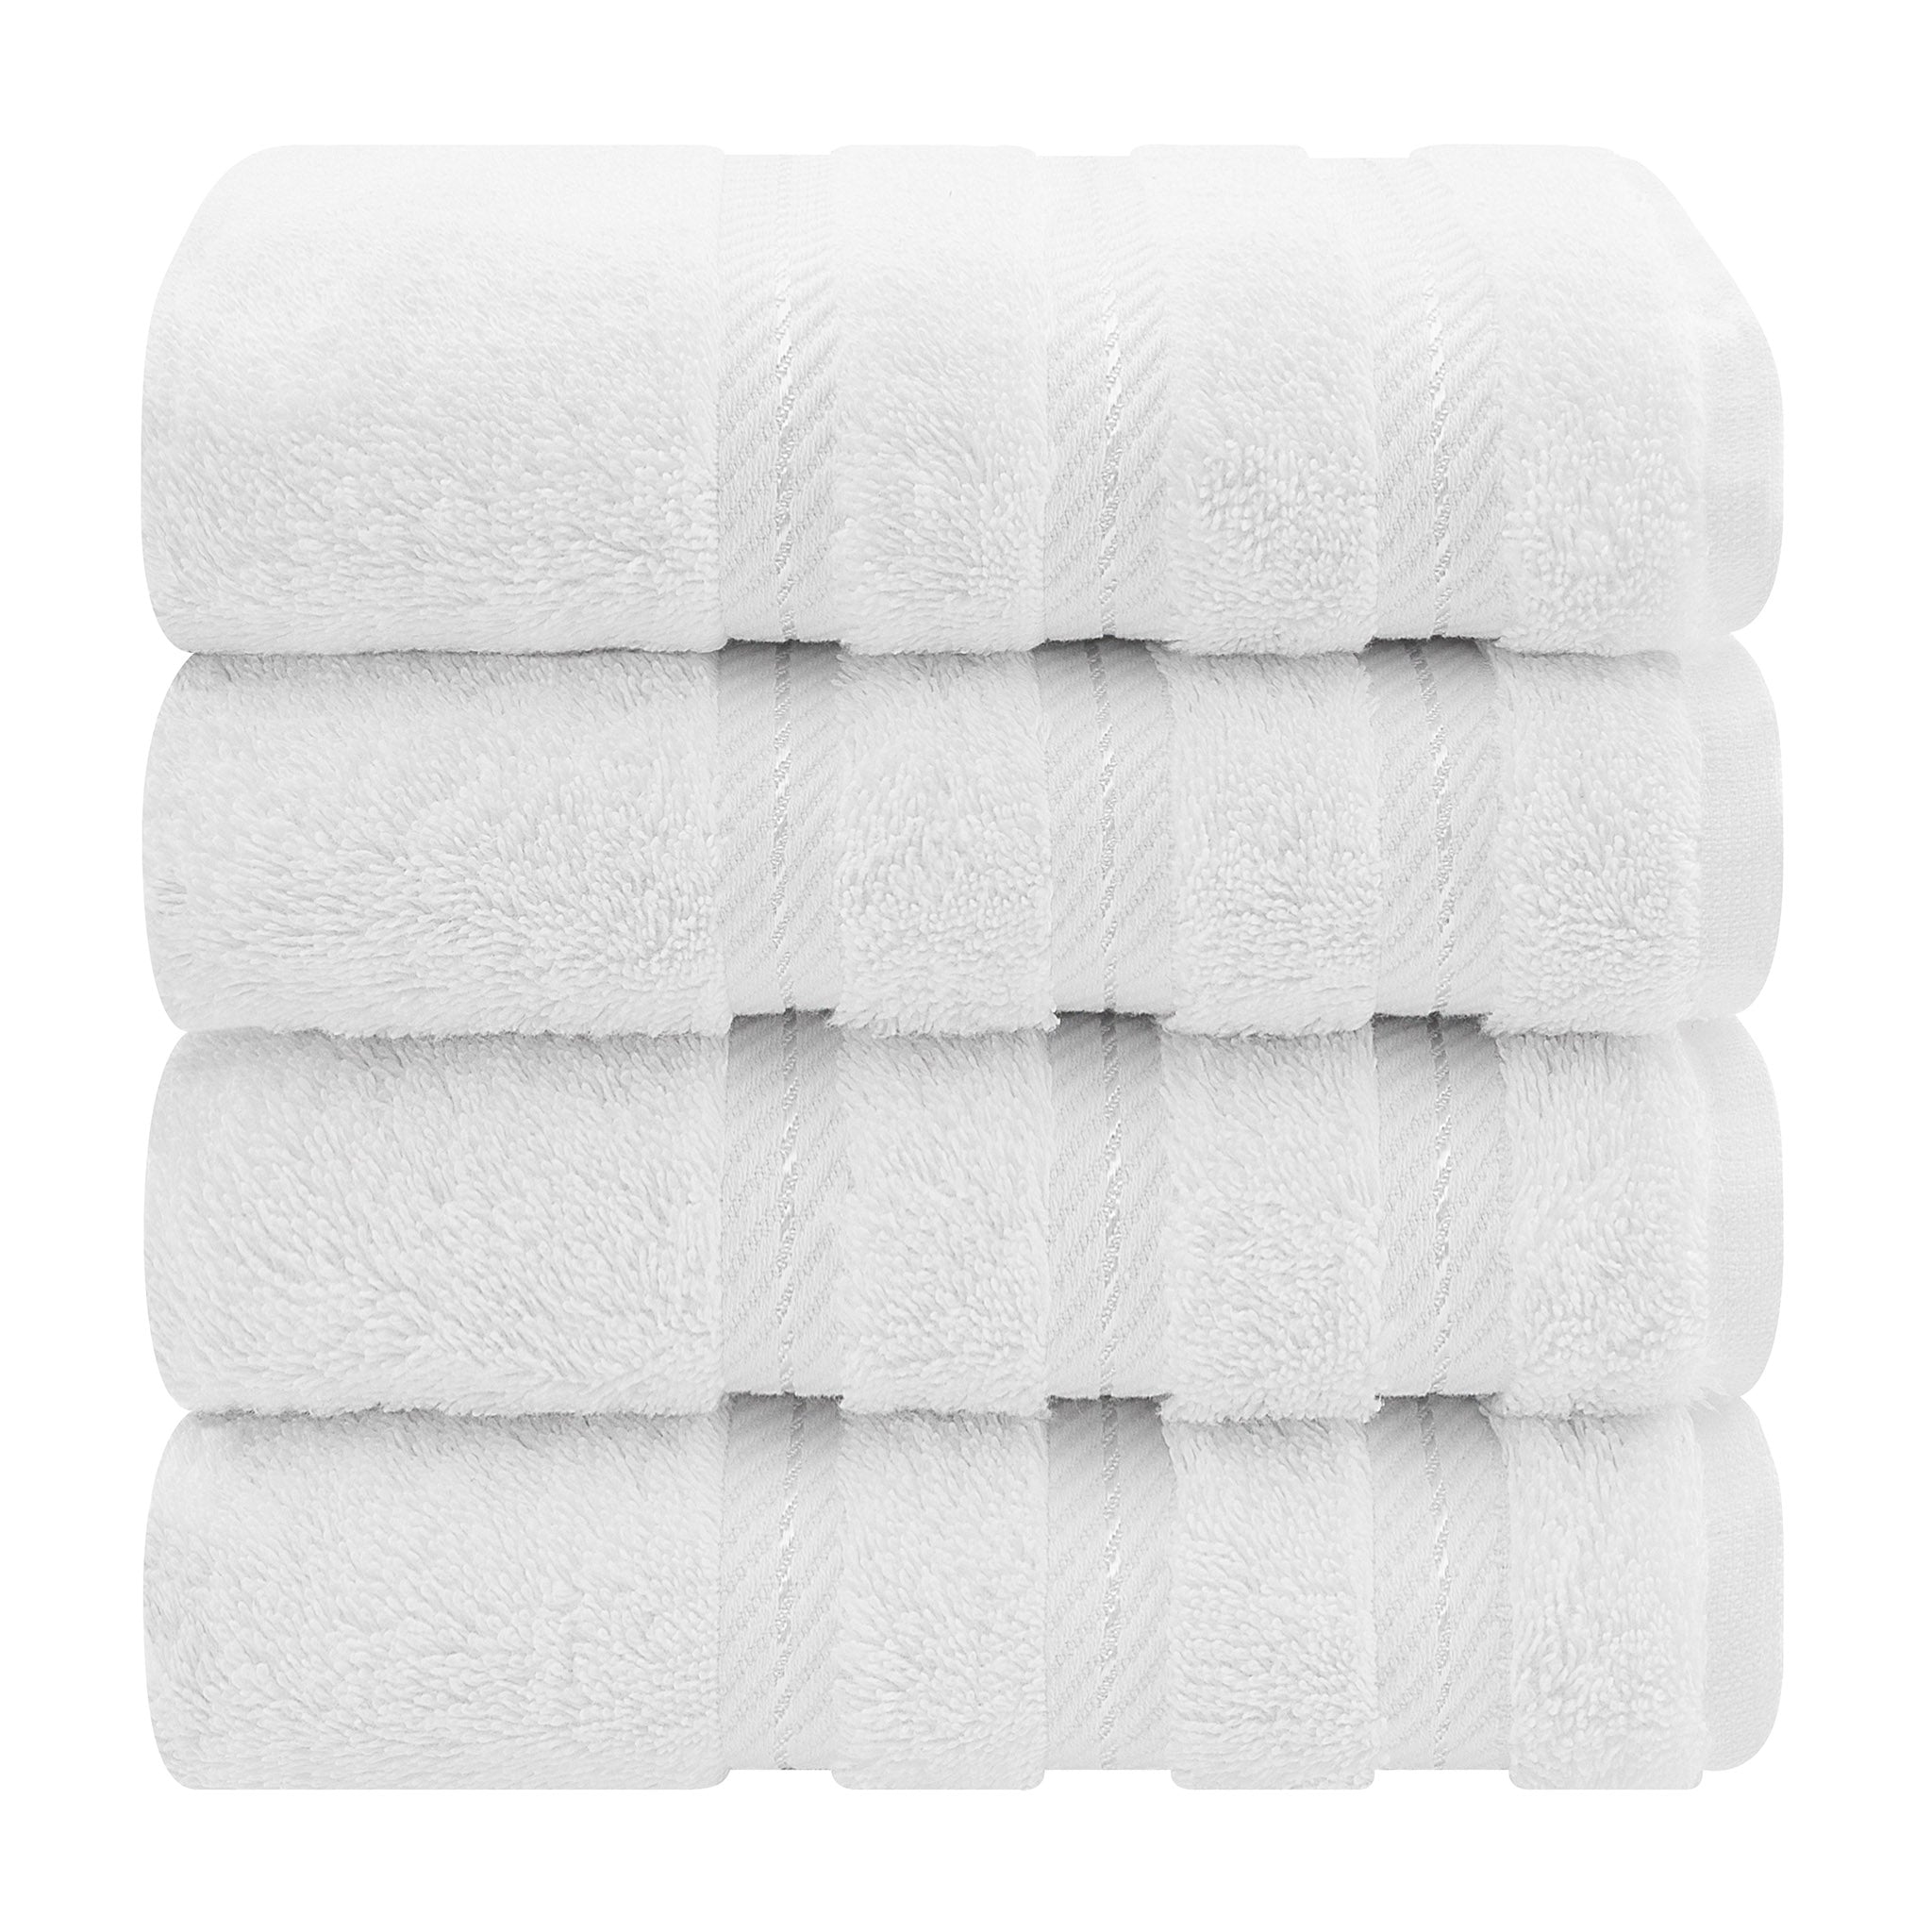 Qute Home 4-Piece Hand Towels Set, 100% Turkish Cotton Premium Quality Towels for Bathroom, Quick Dry Soft and Absorbent Turkish